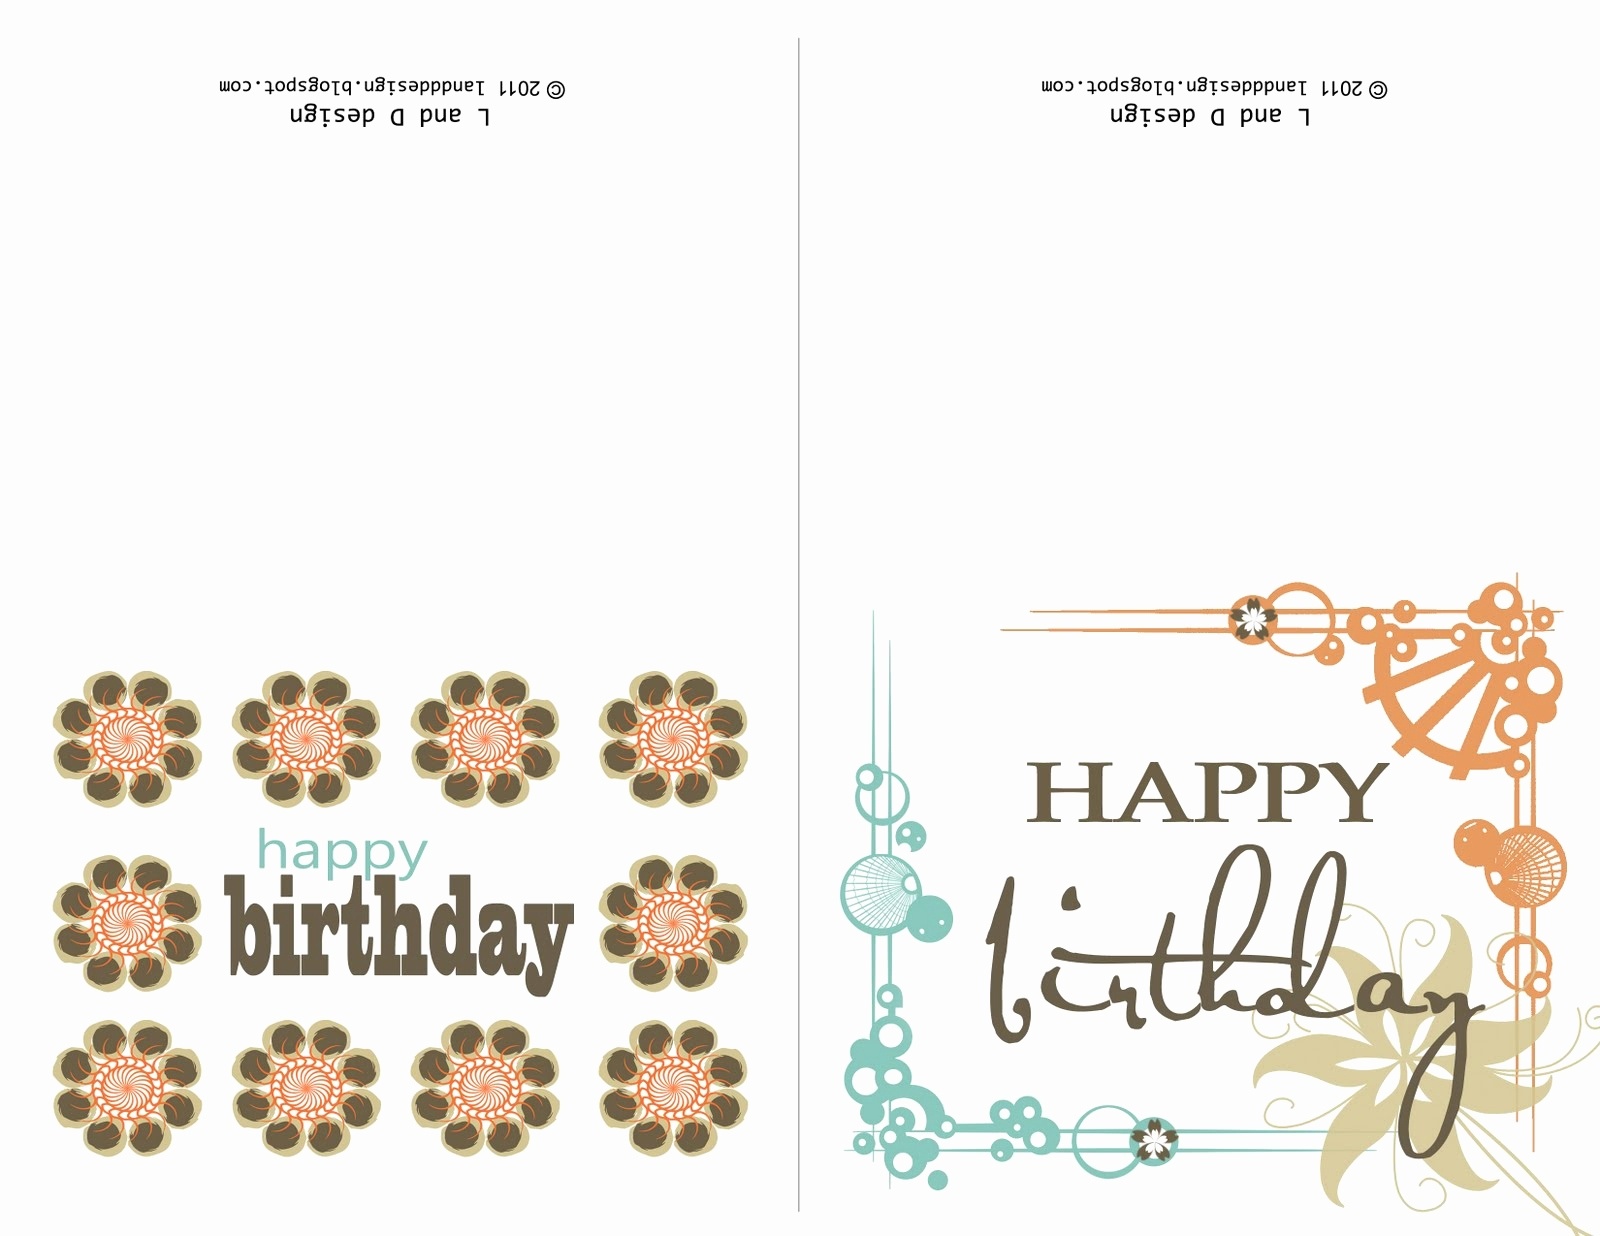 22 of the best ideas for free printable hallmark birthday cards home ...